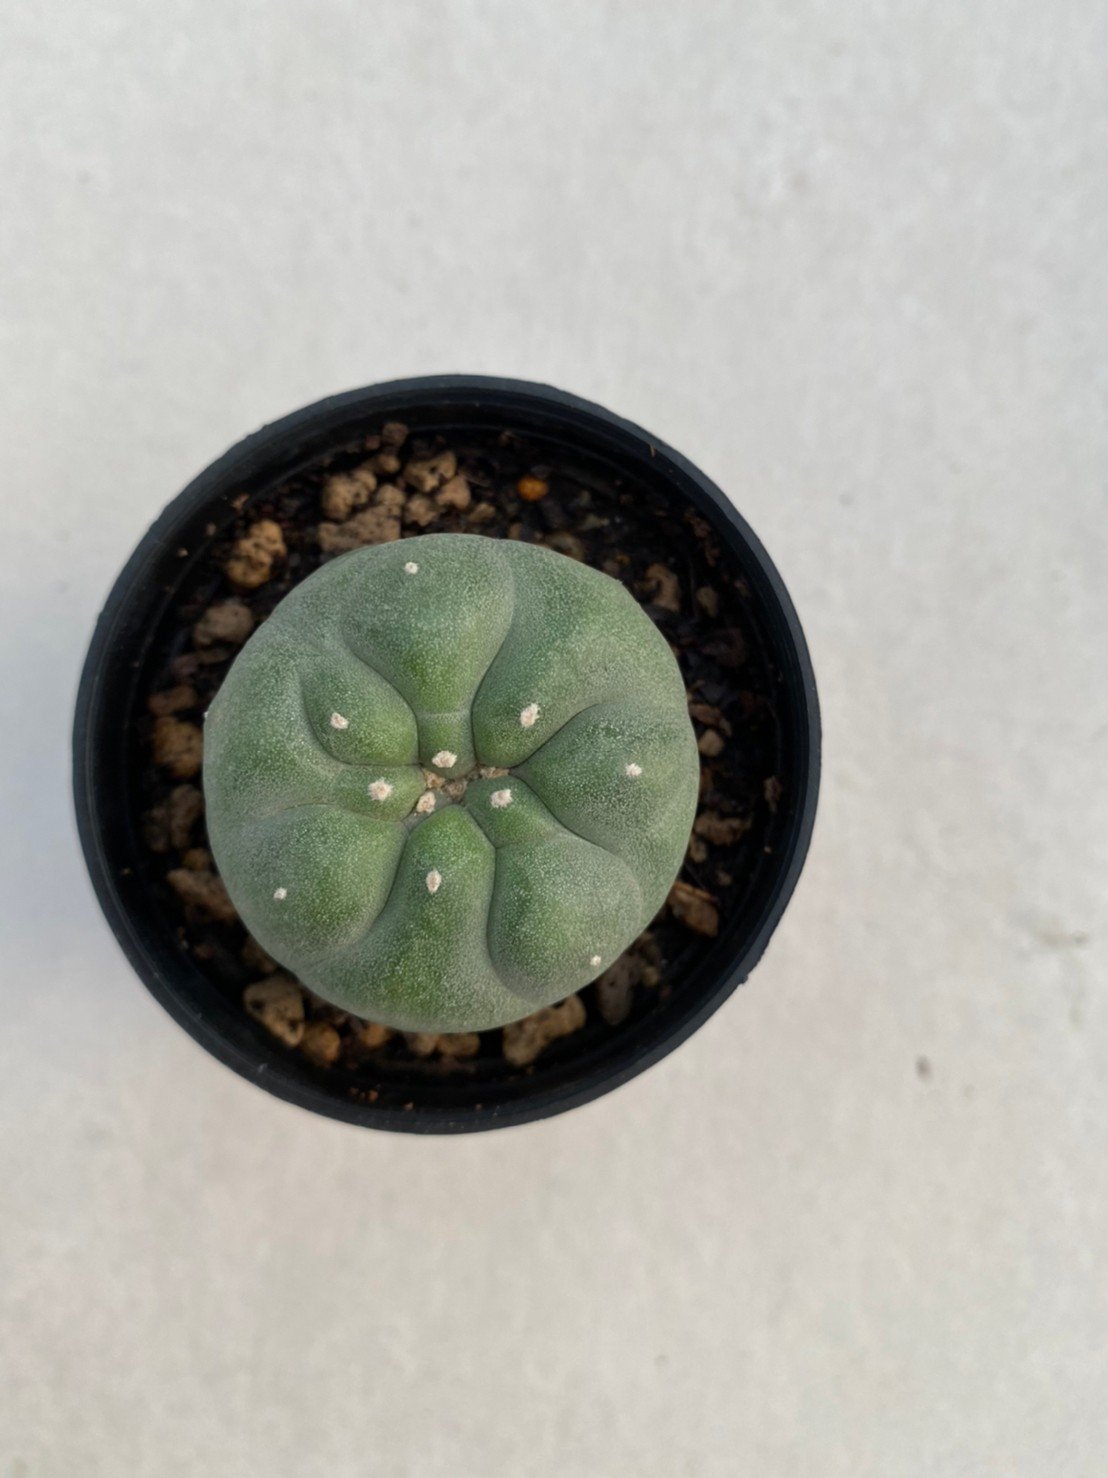 Lophophora Diffusa 3-4 cm 4-5 years old - ownroot grow from seed